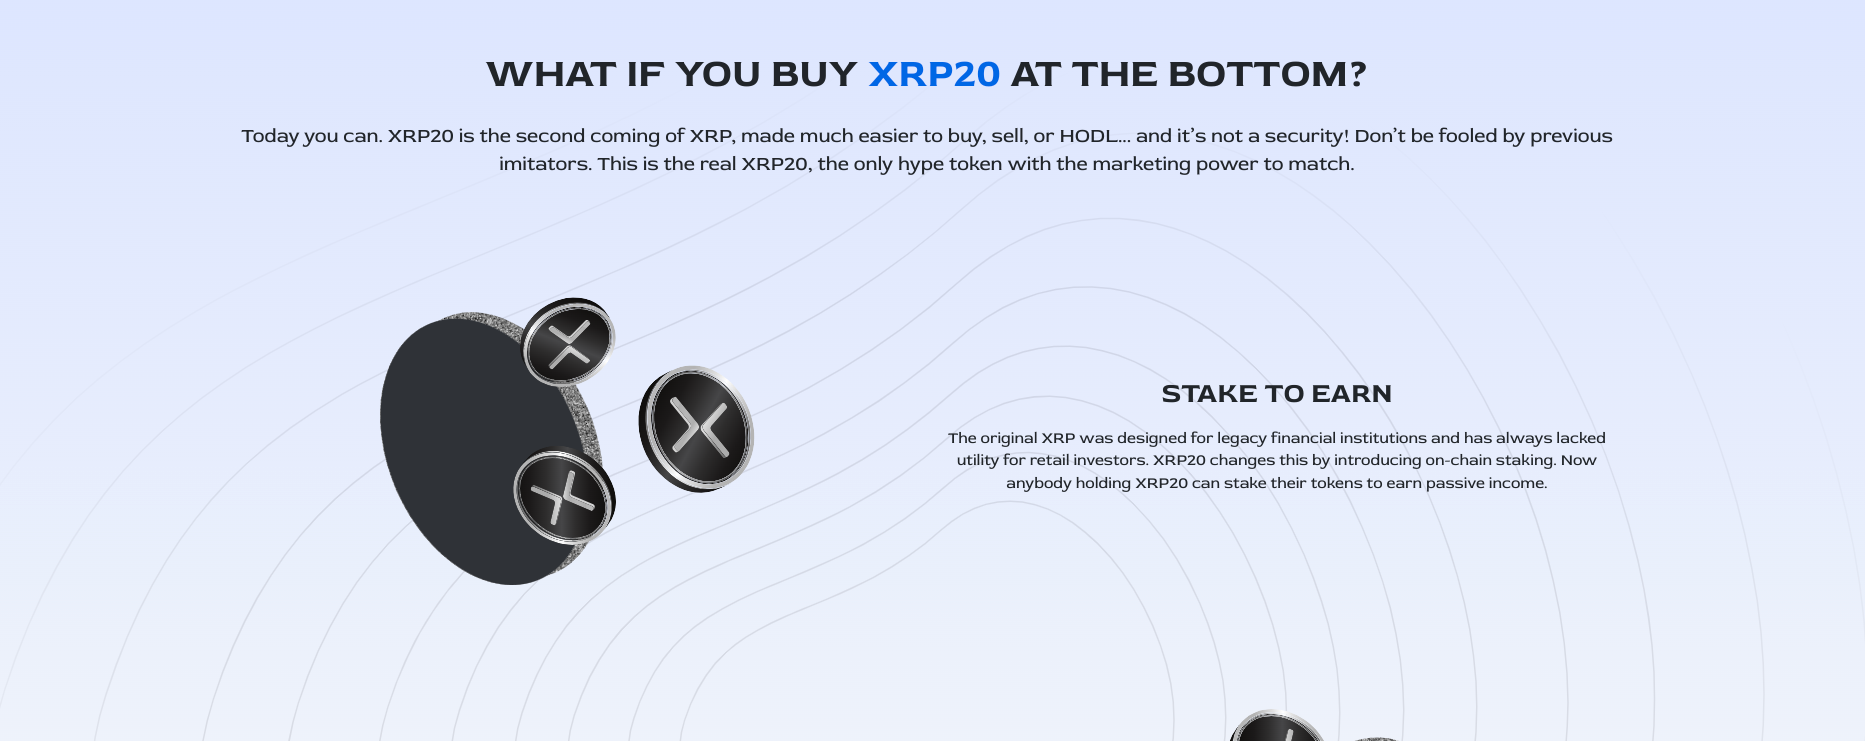 Amidst XRP Robinhood Speculations, XRP20 Coin Price Poised for Imminent 3x Surge